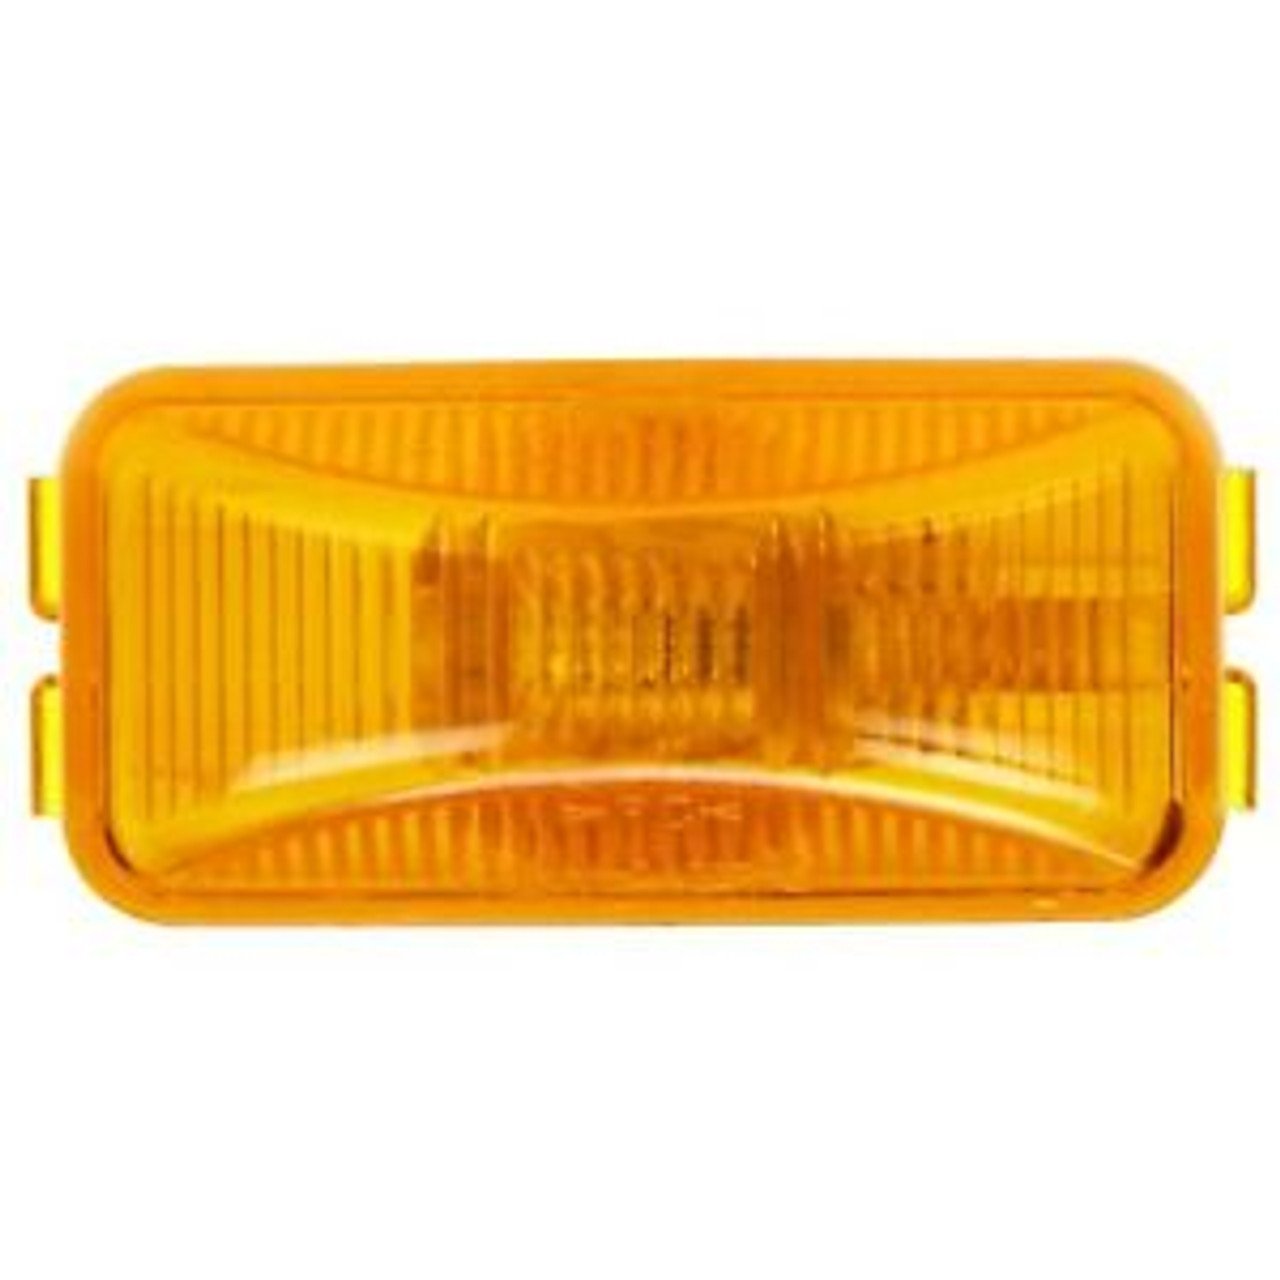 Truck-Lite 15200Y Model 15 (2 1/2" x 1 1/4") Clearance / Marker Lamp- Amber- Incandescent